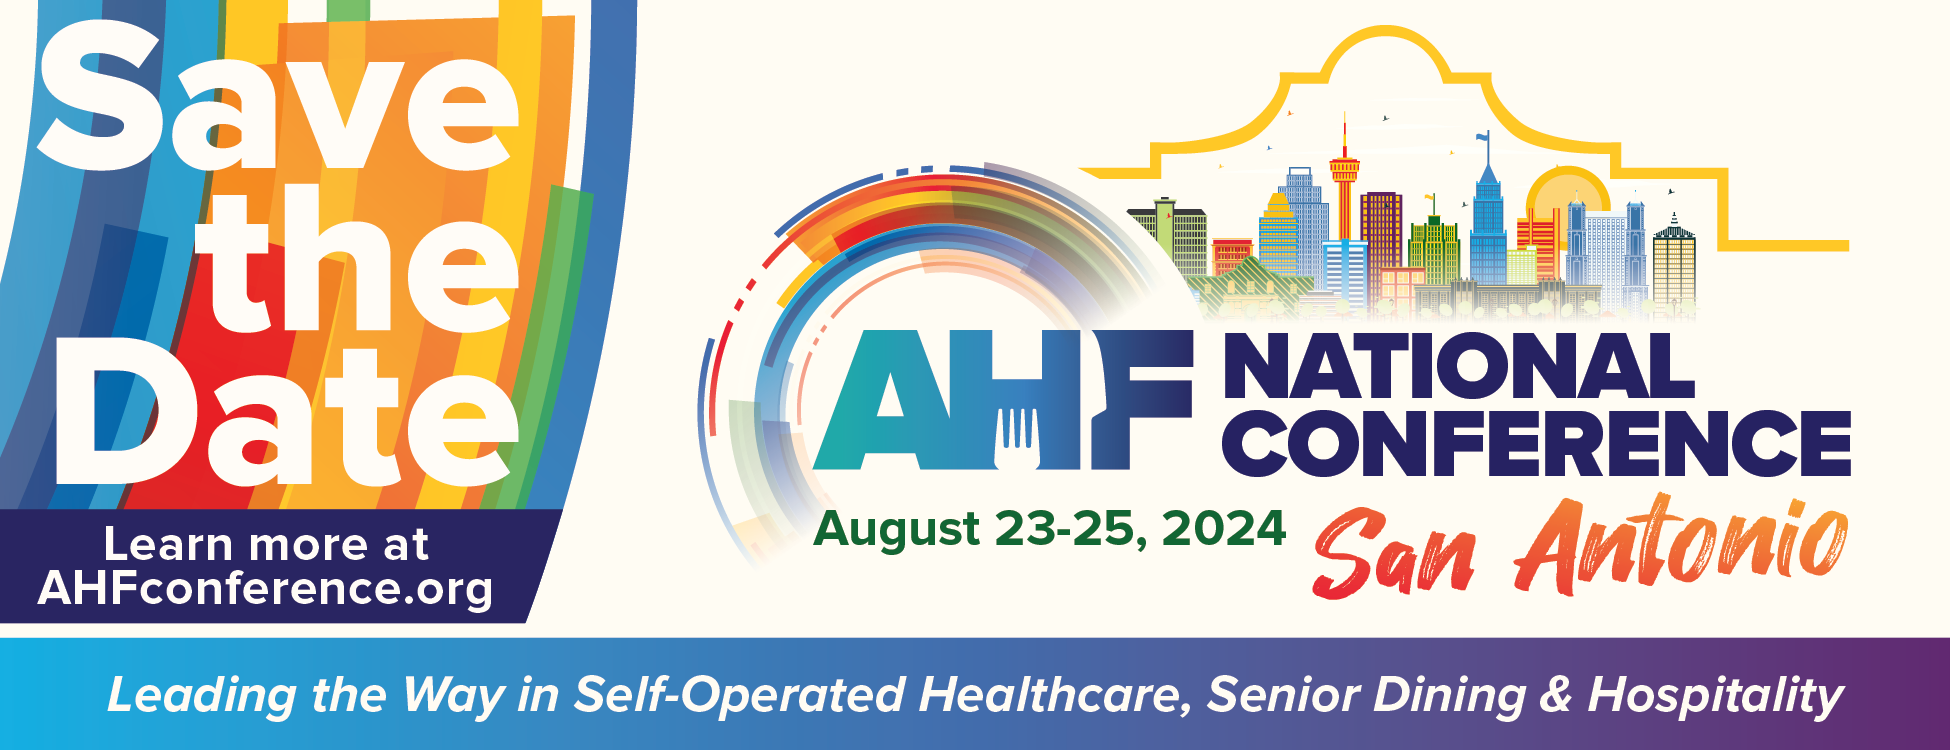 AHF National Conference. August 23-25, 2024. San Antonio, TX. Save the date. Register now.